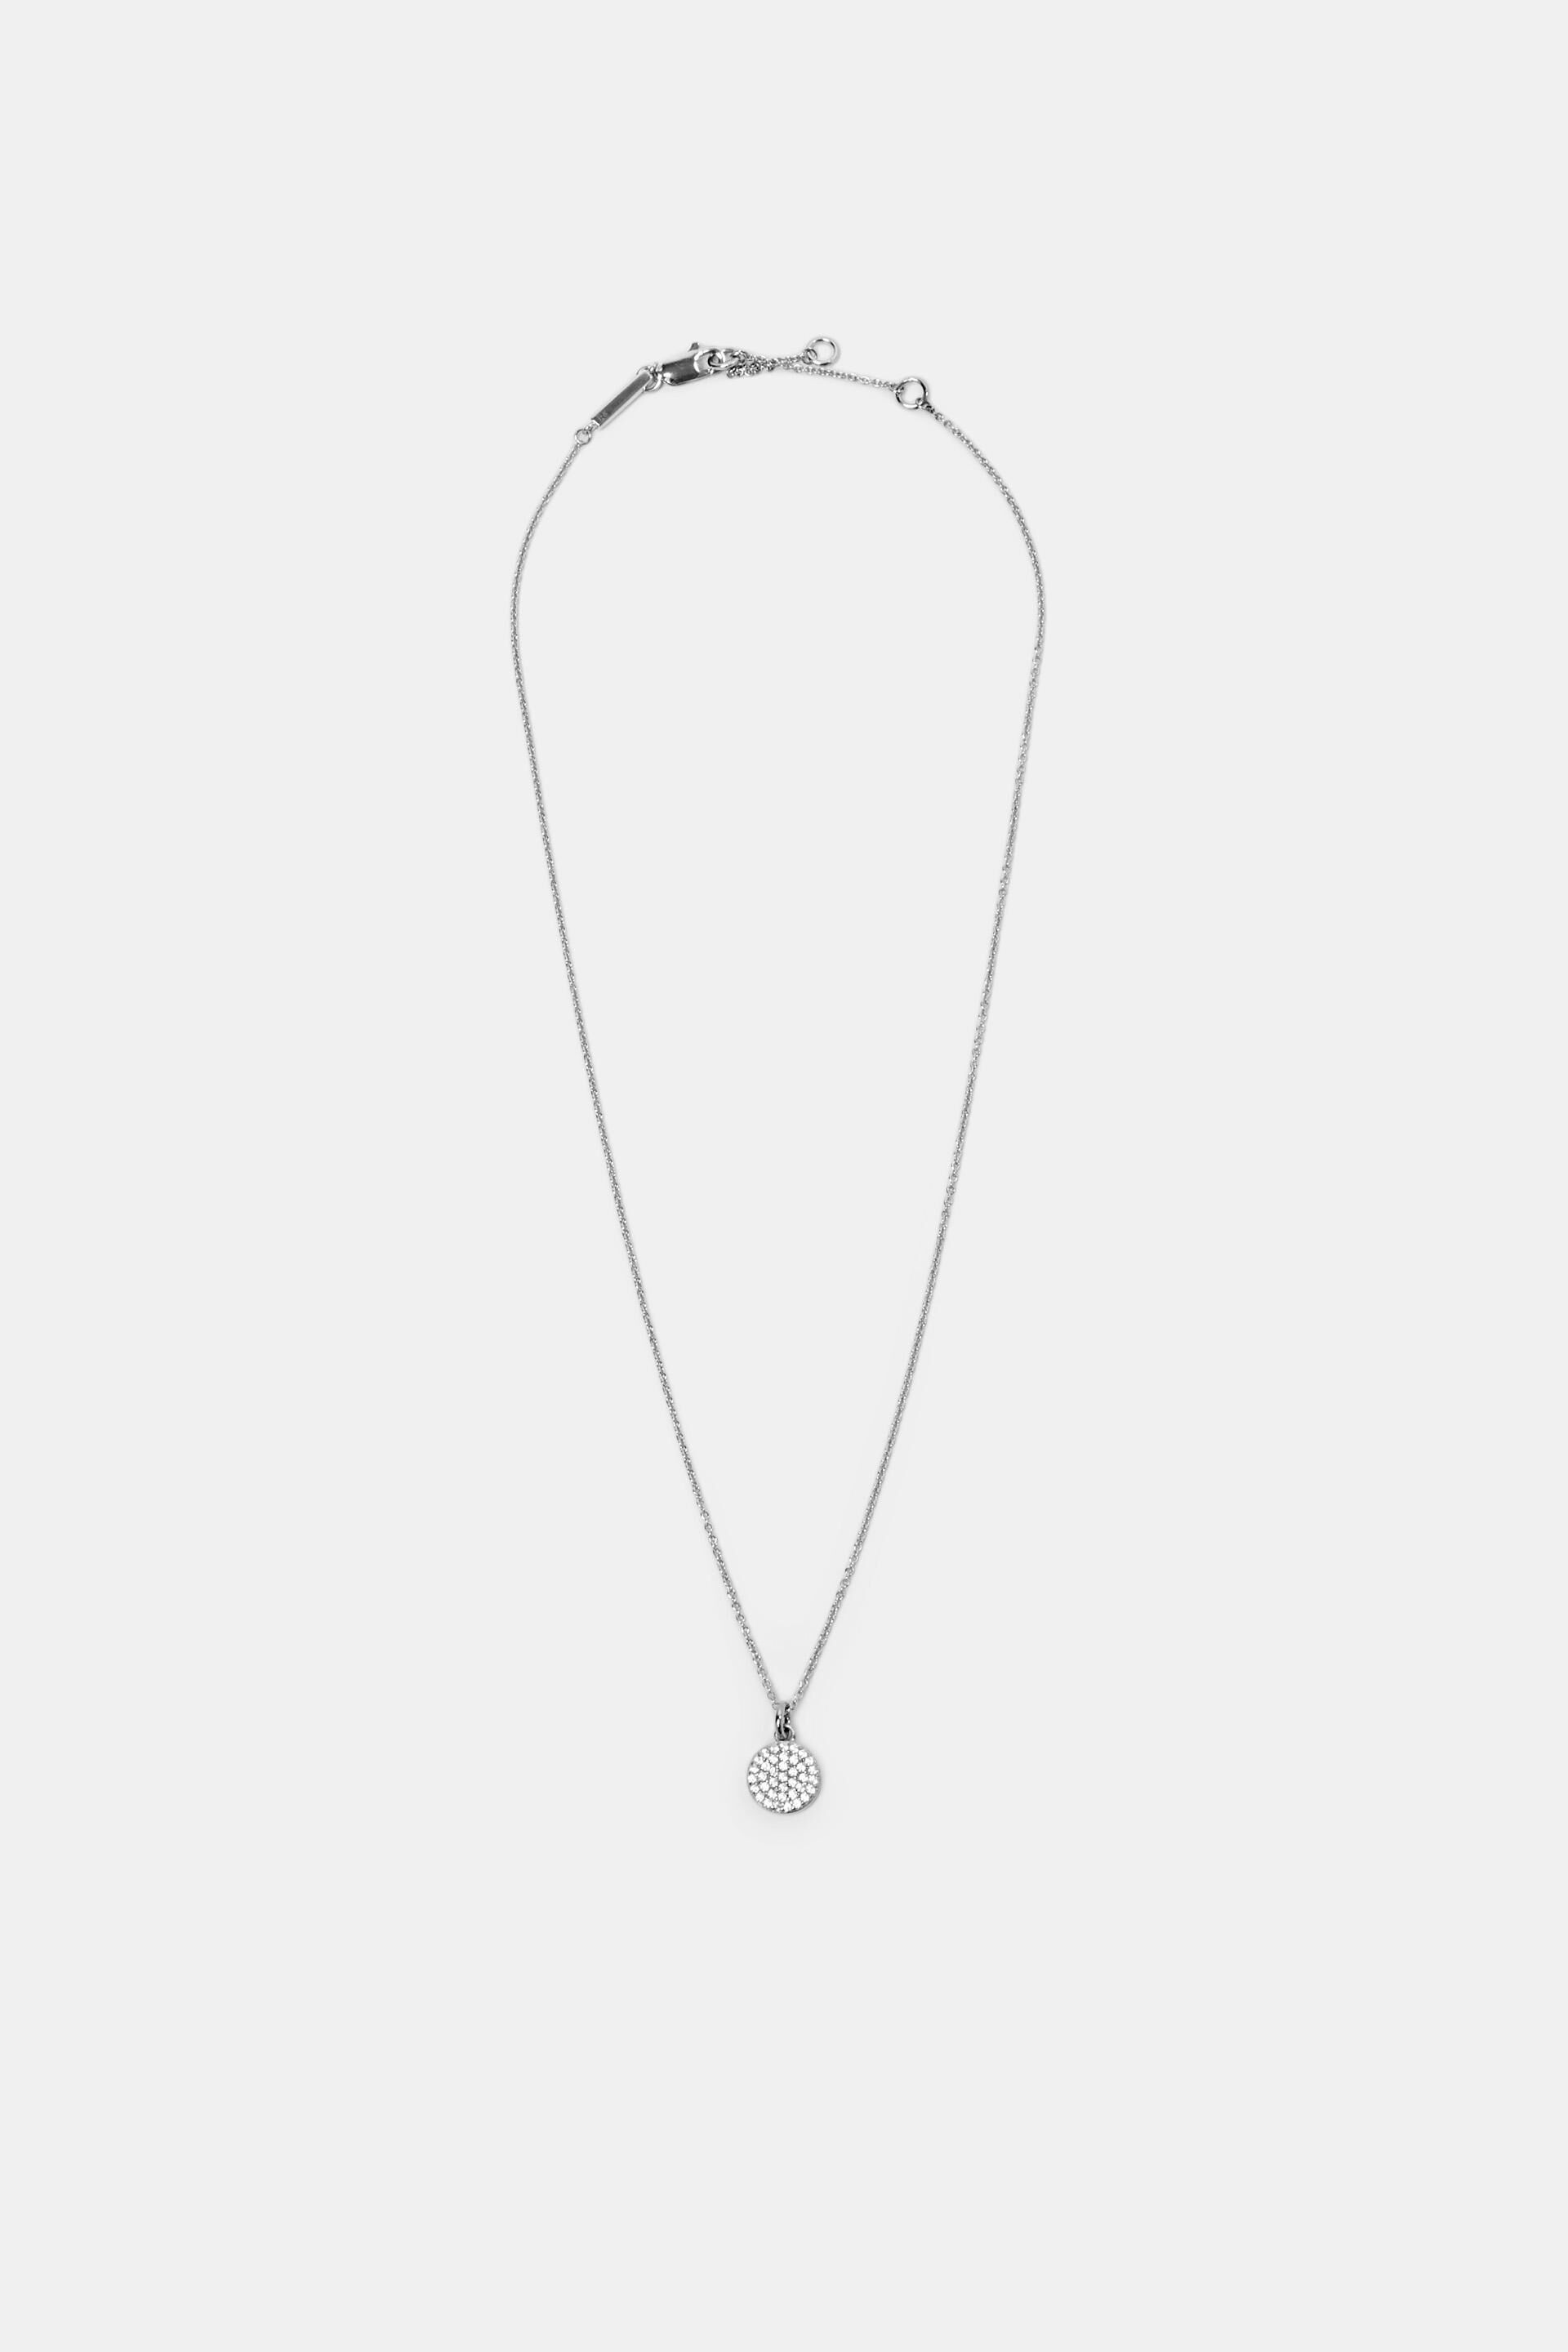 Esprit sterling silver Necklace with pendant, zirconia